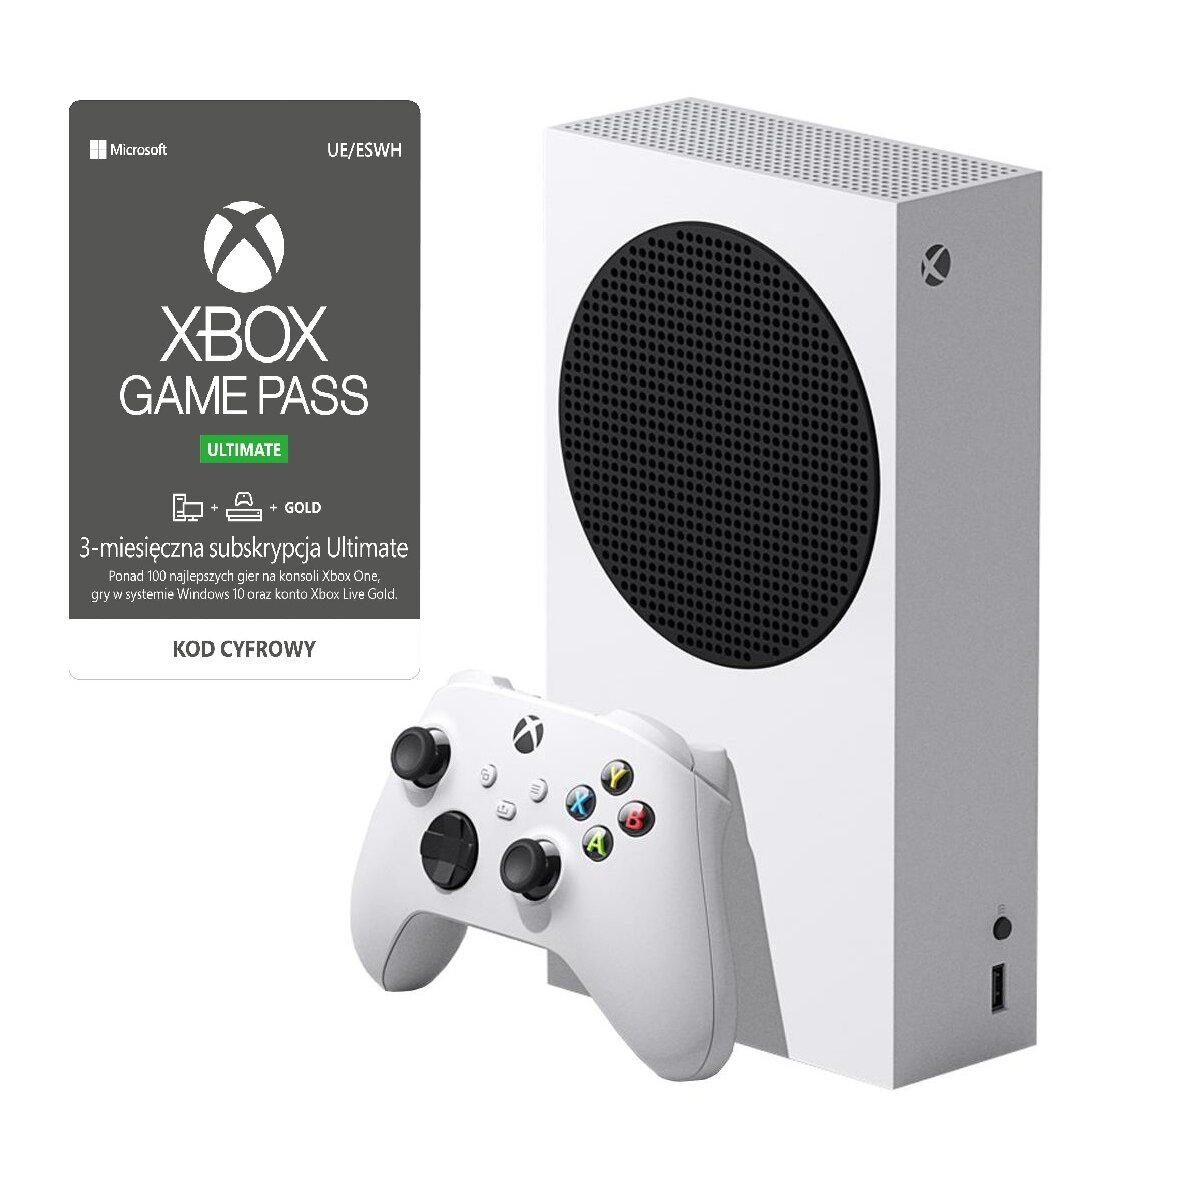 xbox one s 500gb game pass console